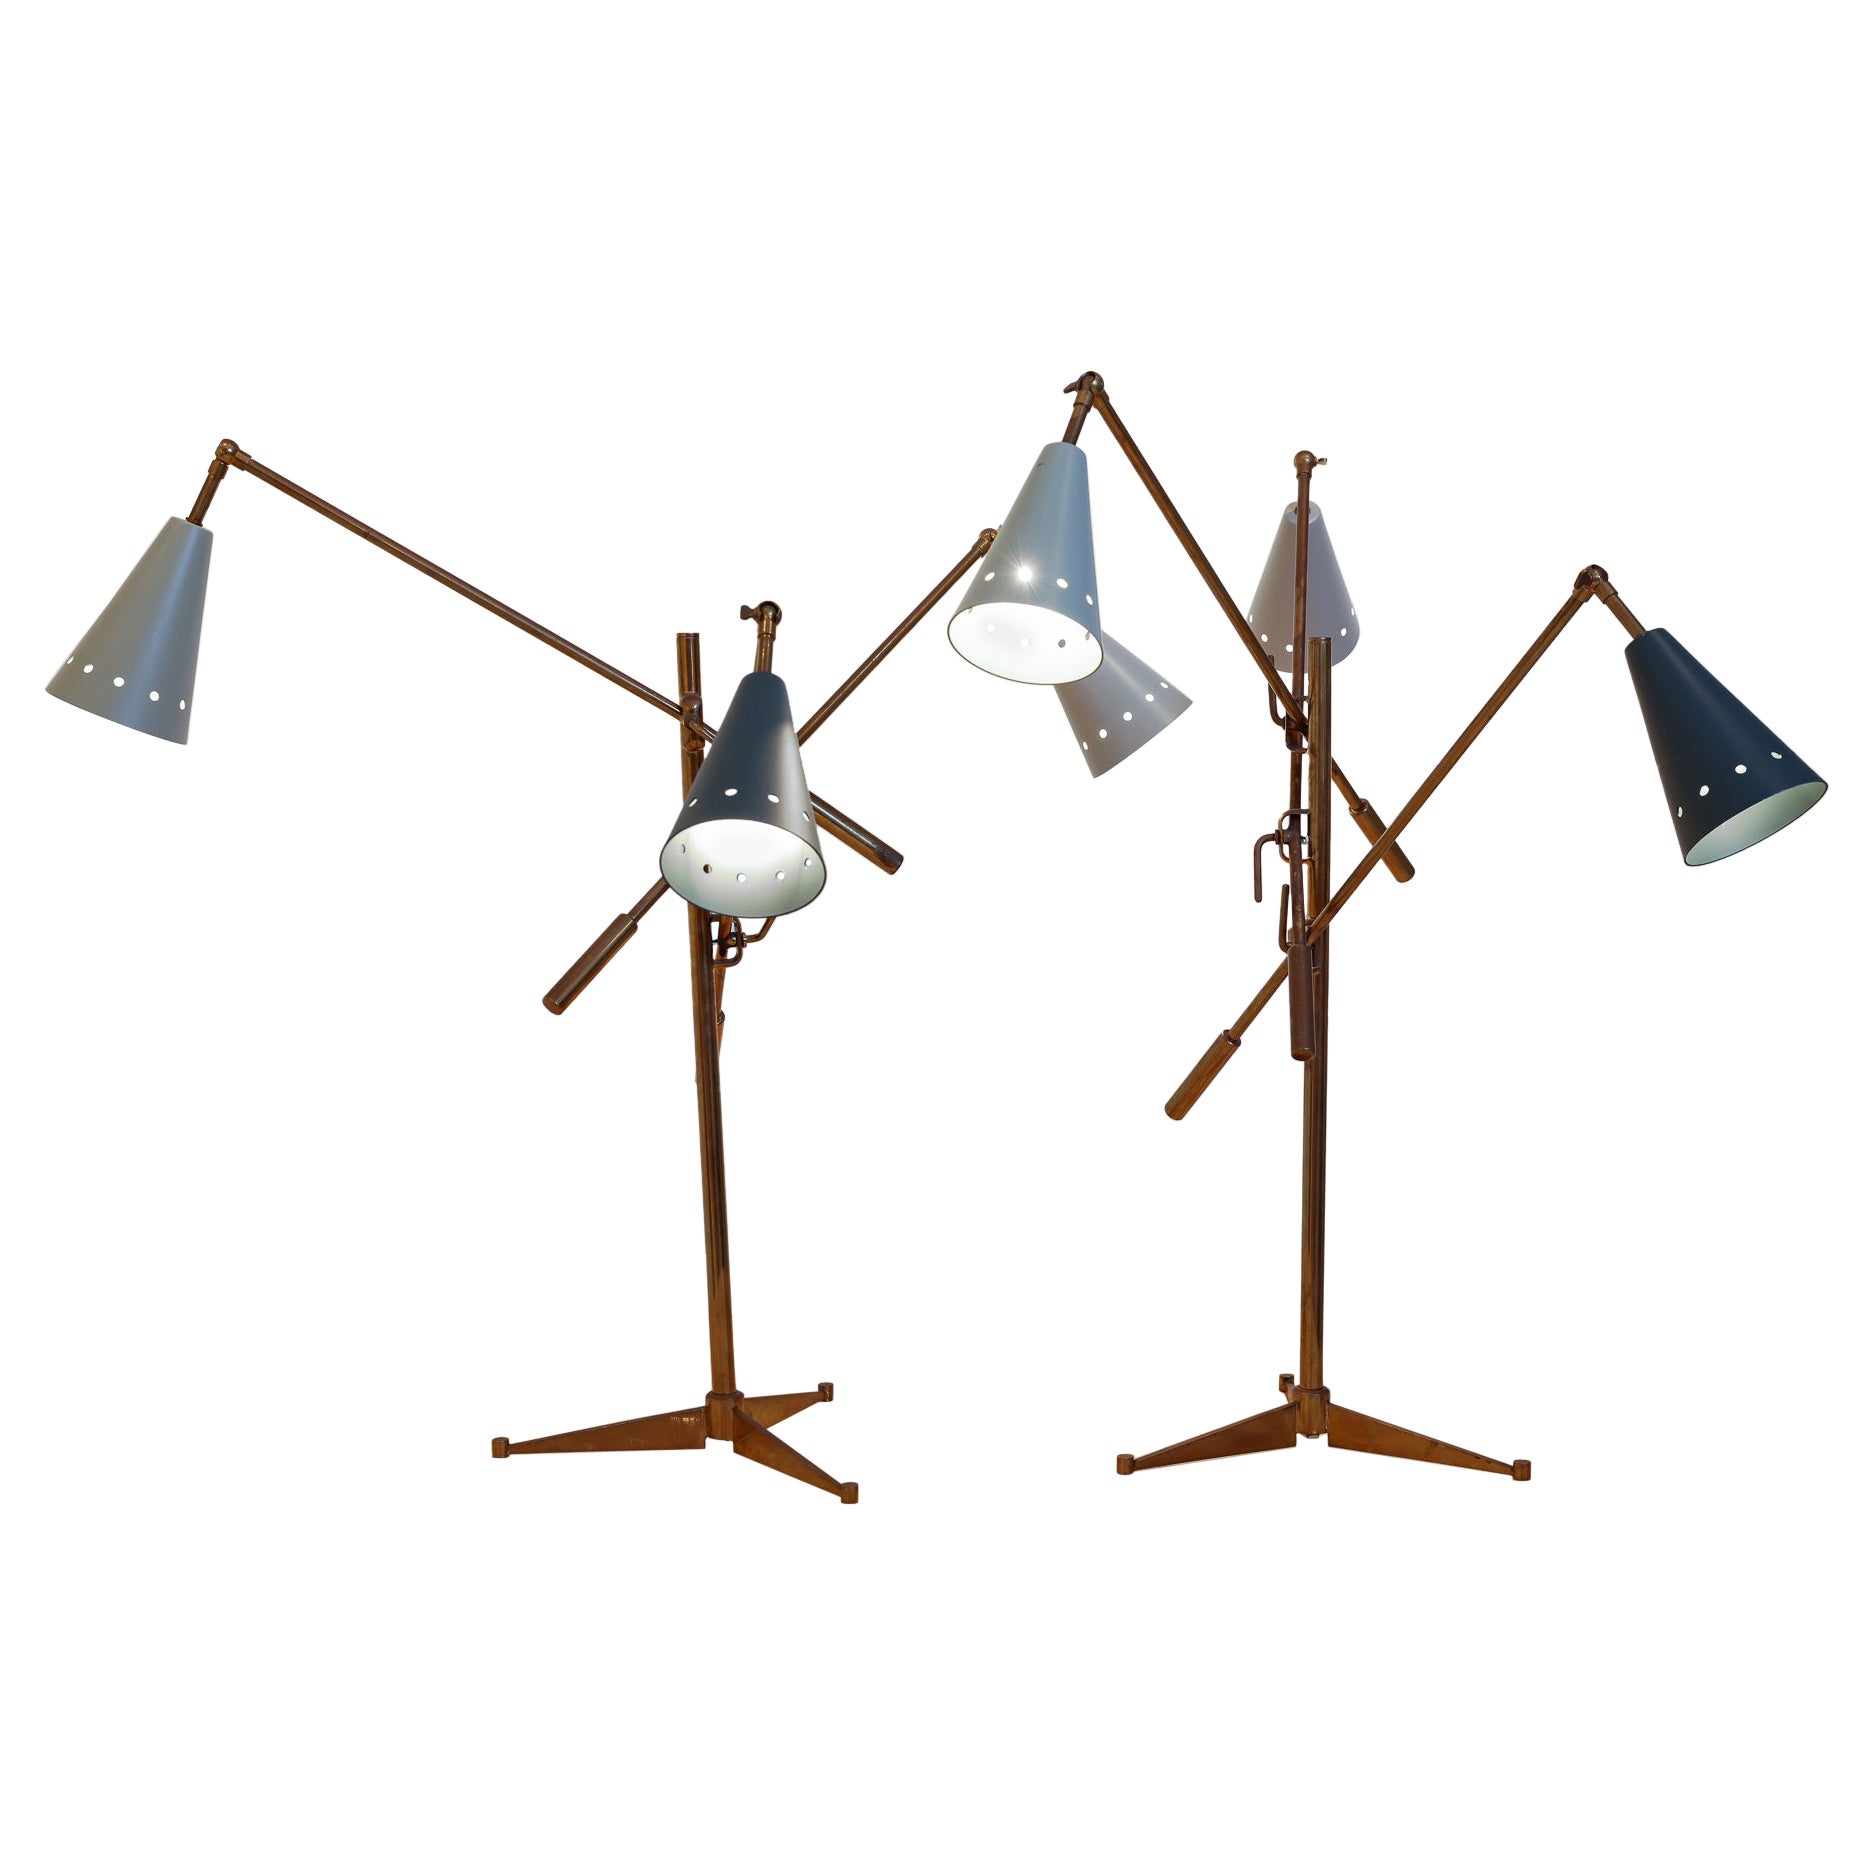 Pair of Brass and Enamel "Triennale" Table Lamps